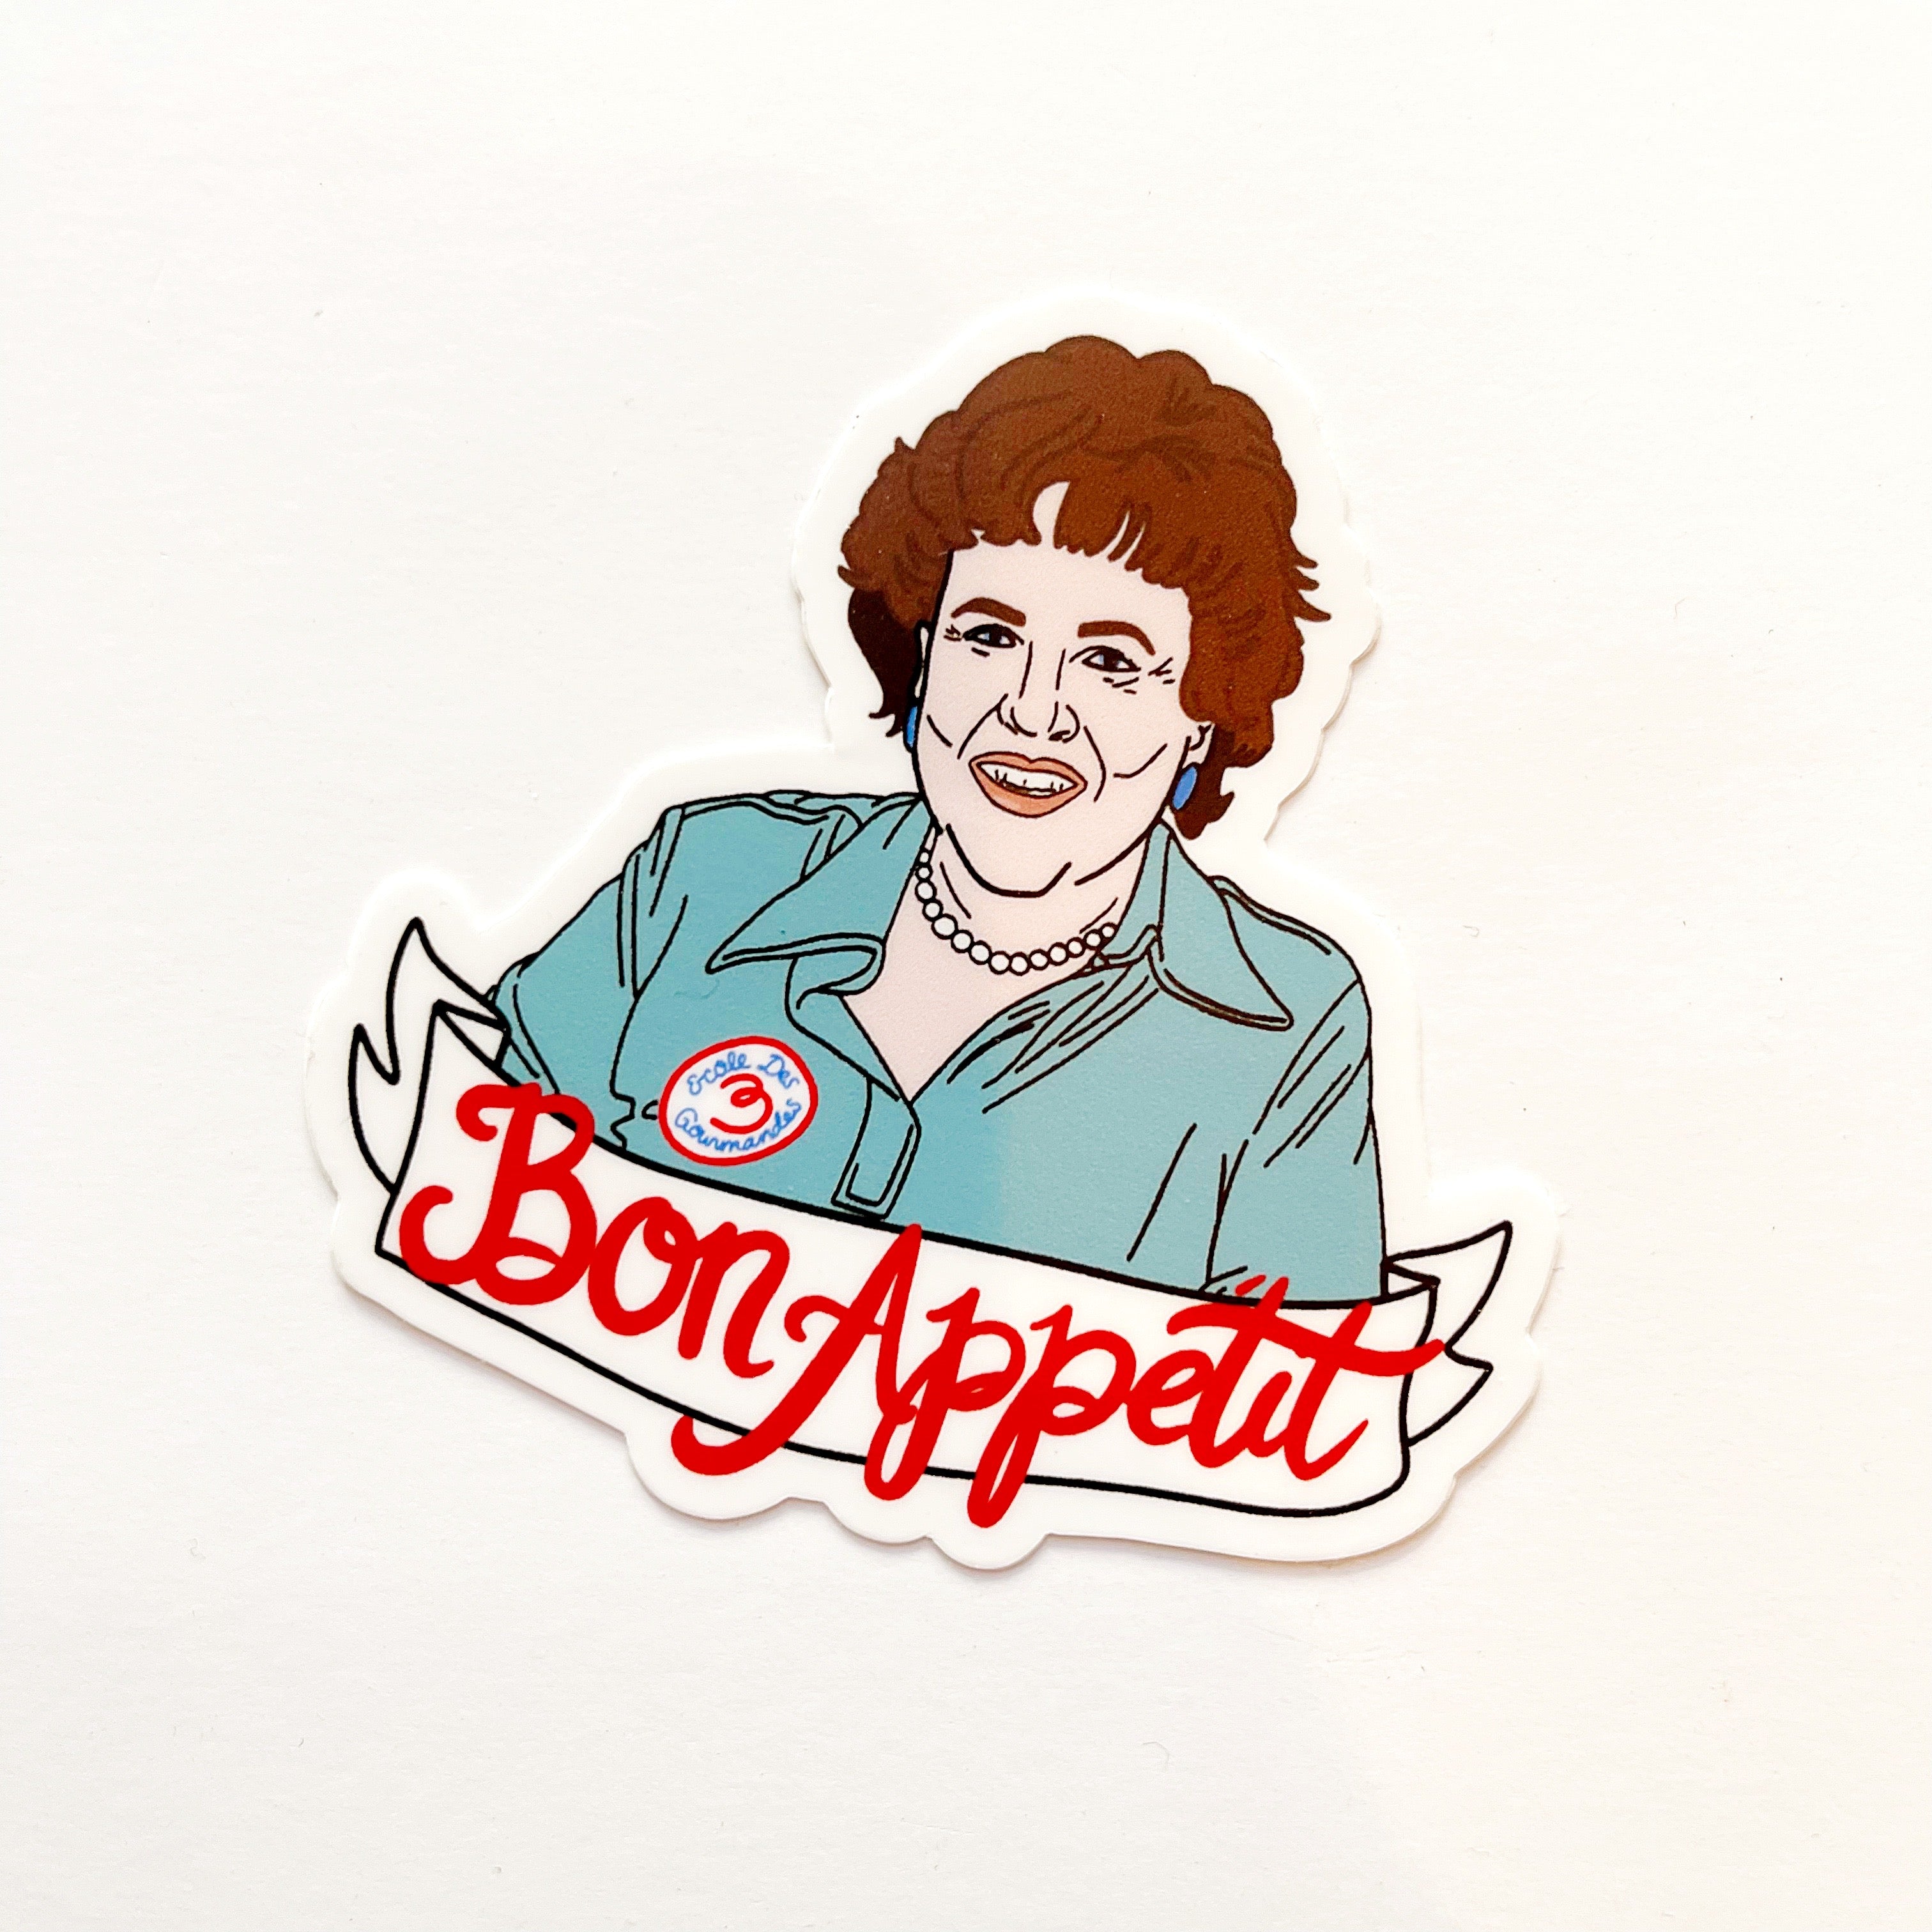 Image of Julia Child in a blue shirt with red text on a white banner says, “Bon Appetit”.